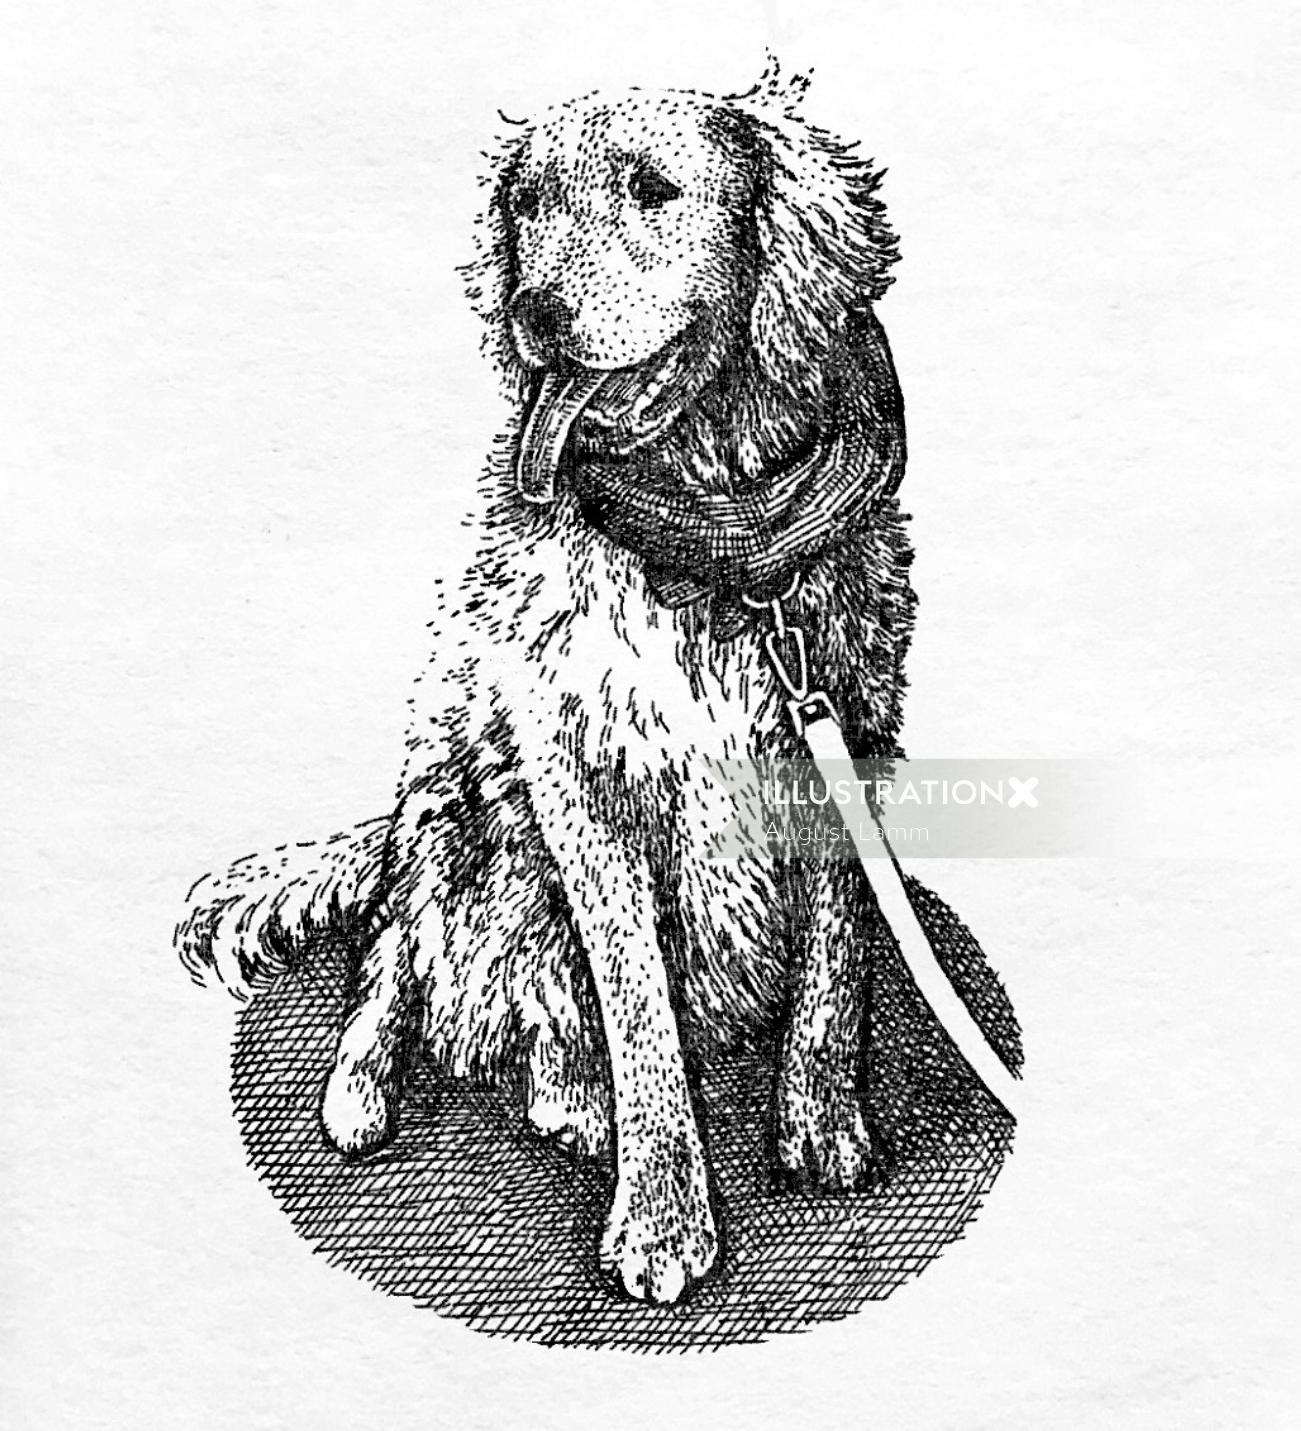 Black and white sketch of dog